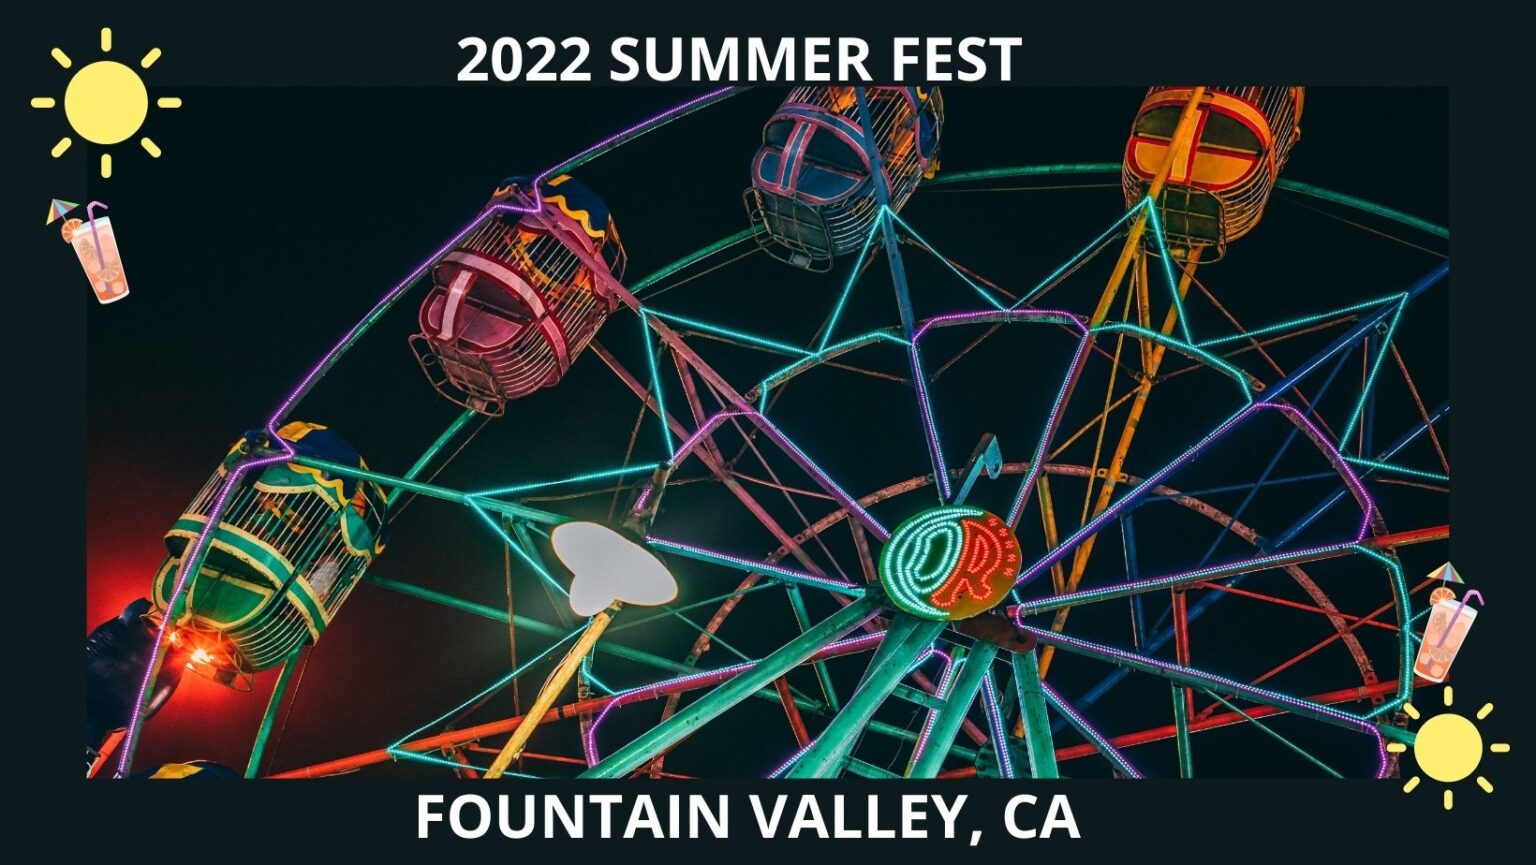 2022 Fountain Valley Summerfest Fireworks, Carnival Rides, Live Music